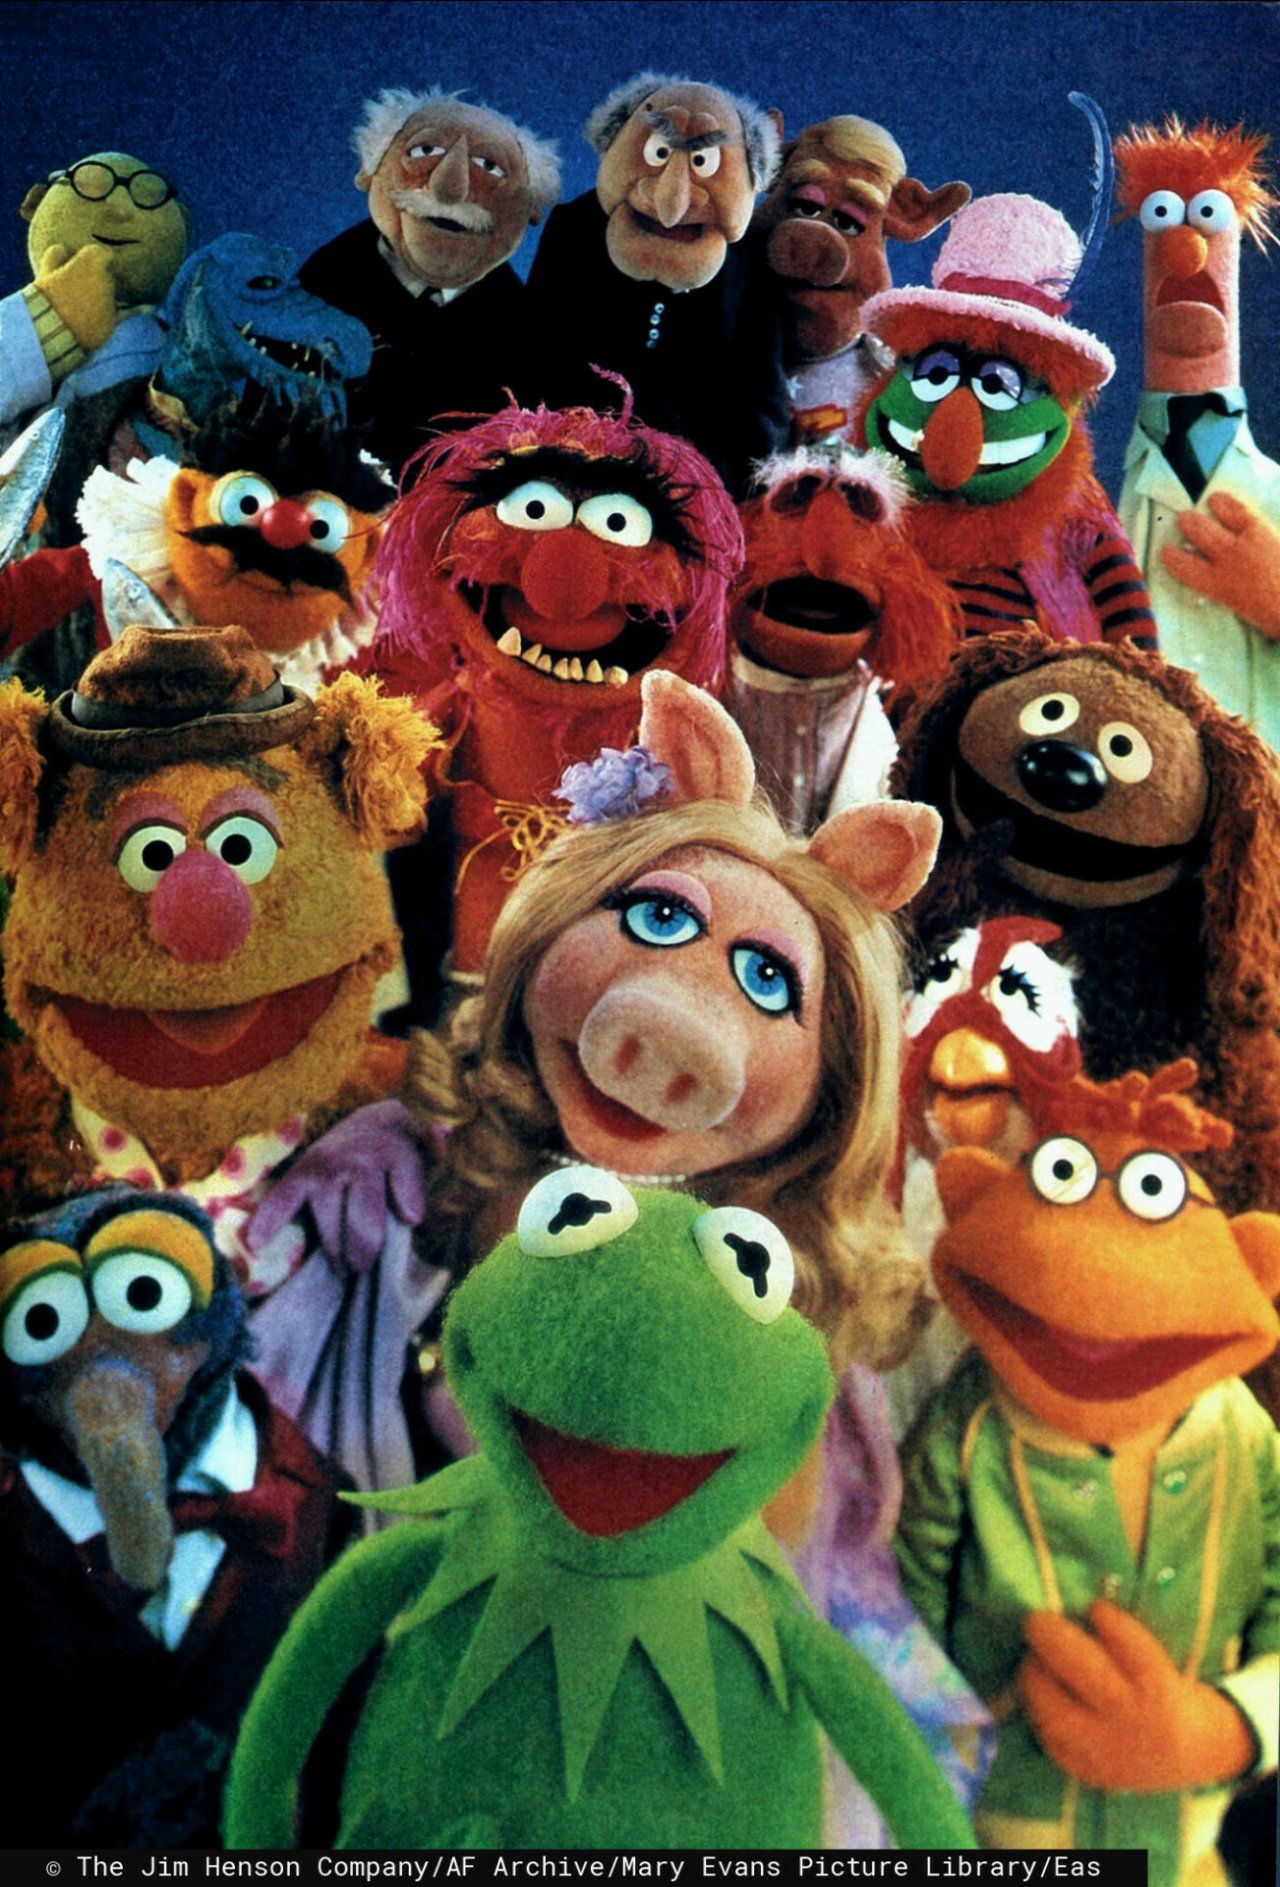 The Muppet Show, bohaterzy